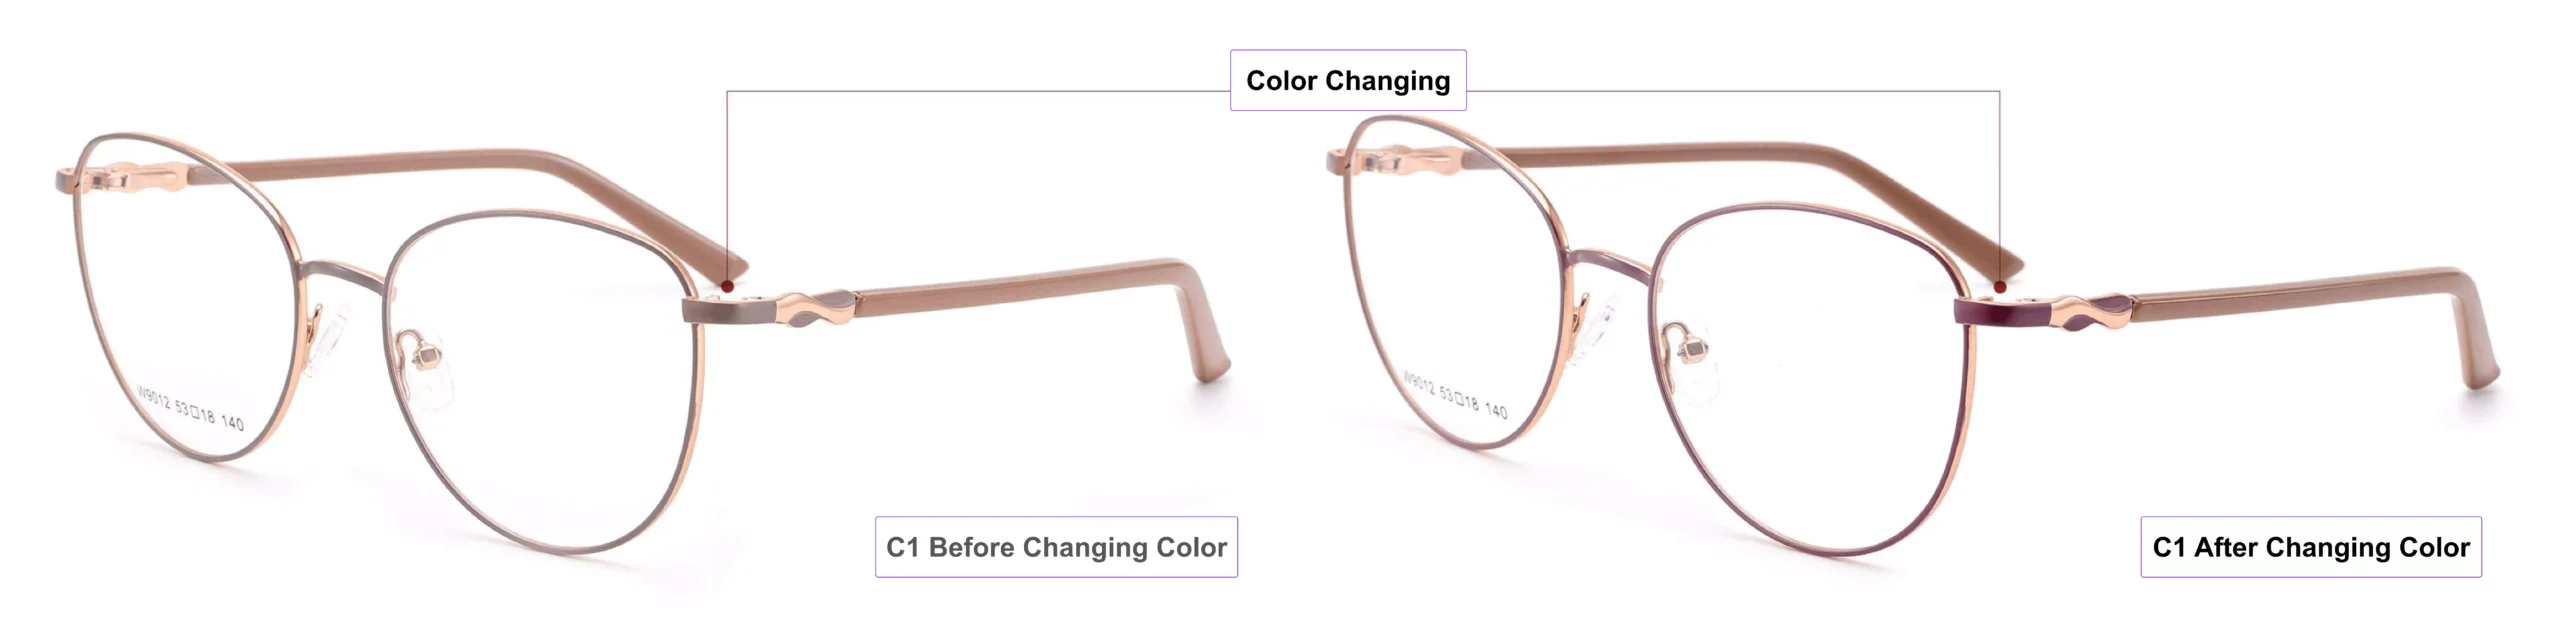 Color Changing Glasses Frames, process of glasses color changing, brown,magenta purple,pink gold